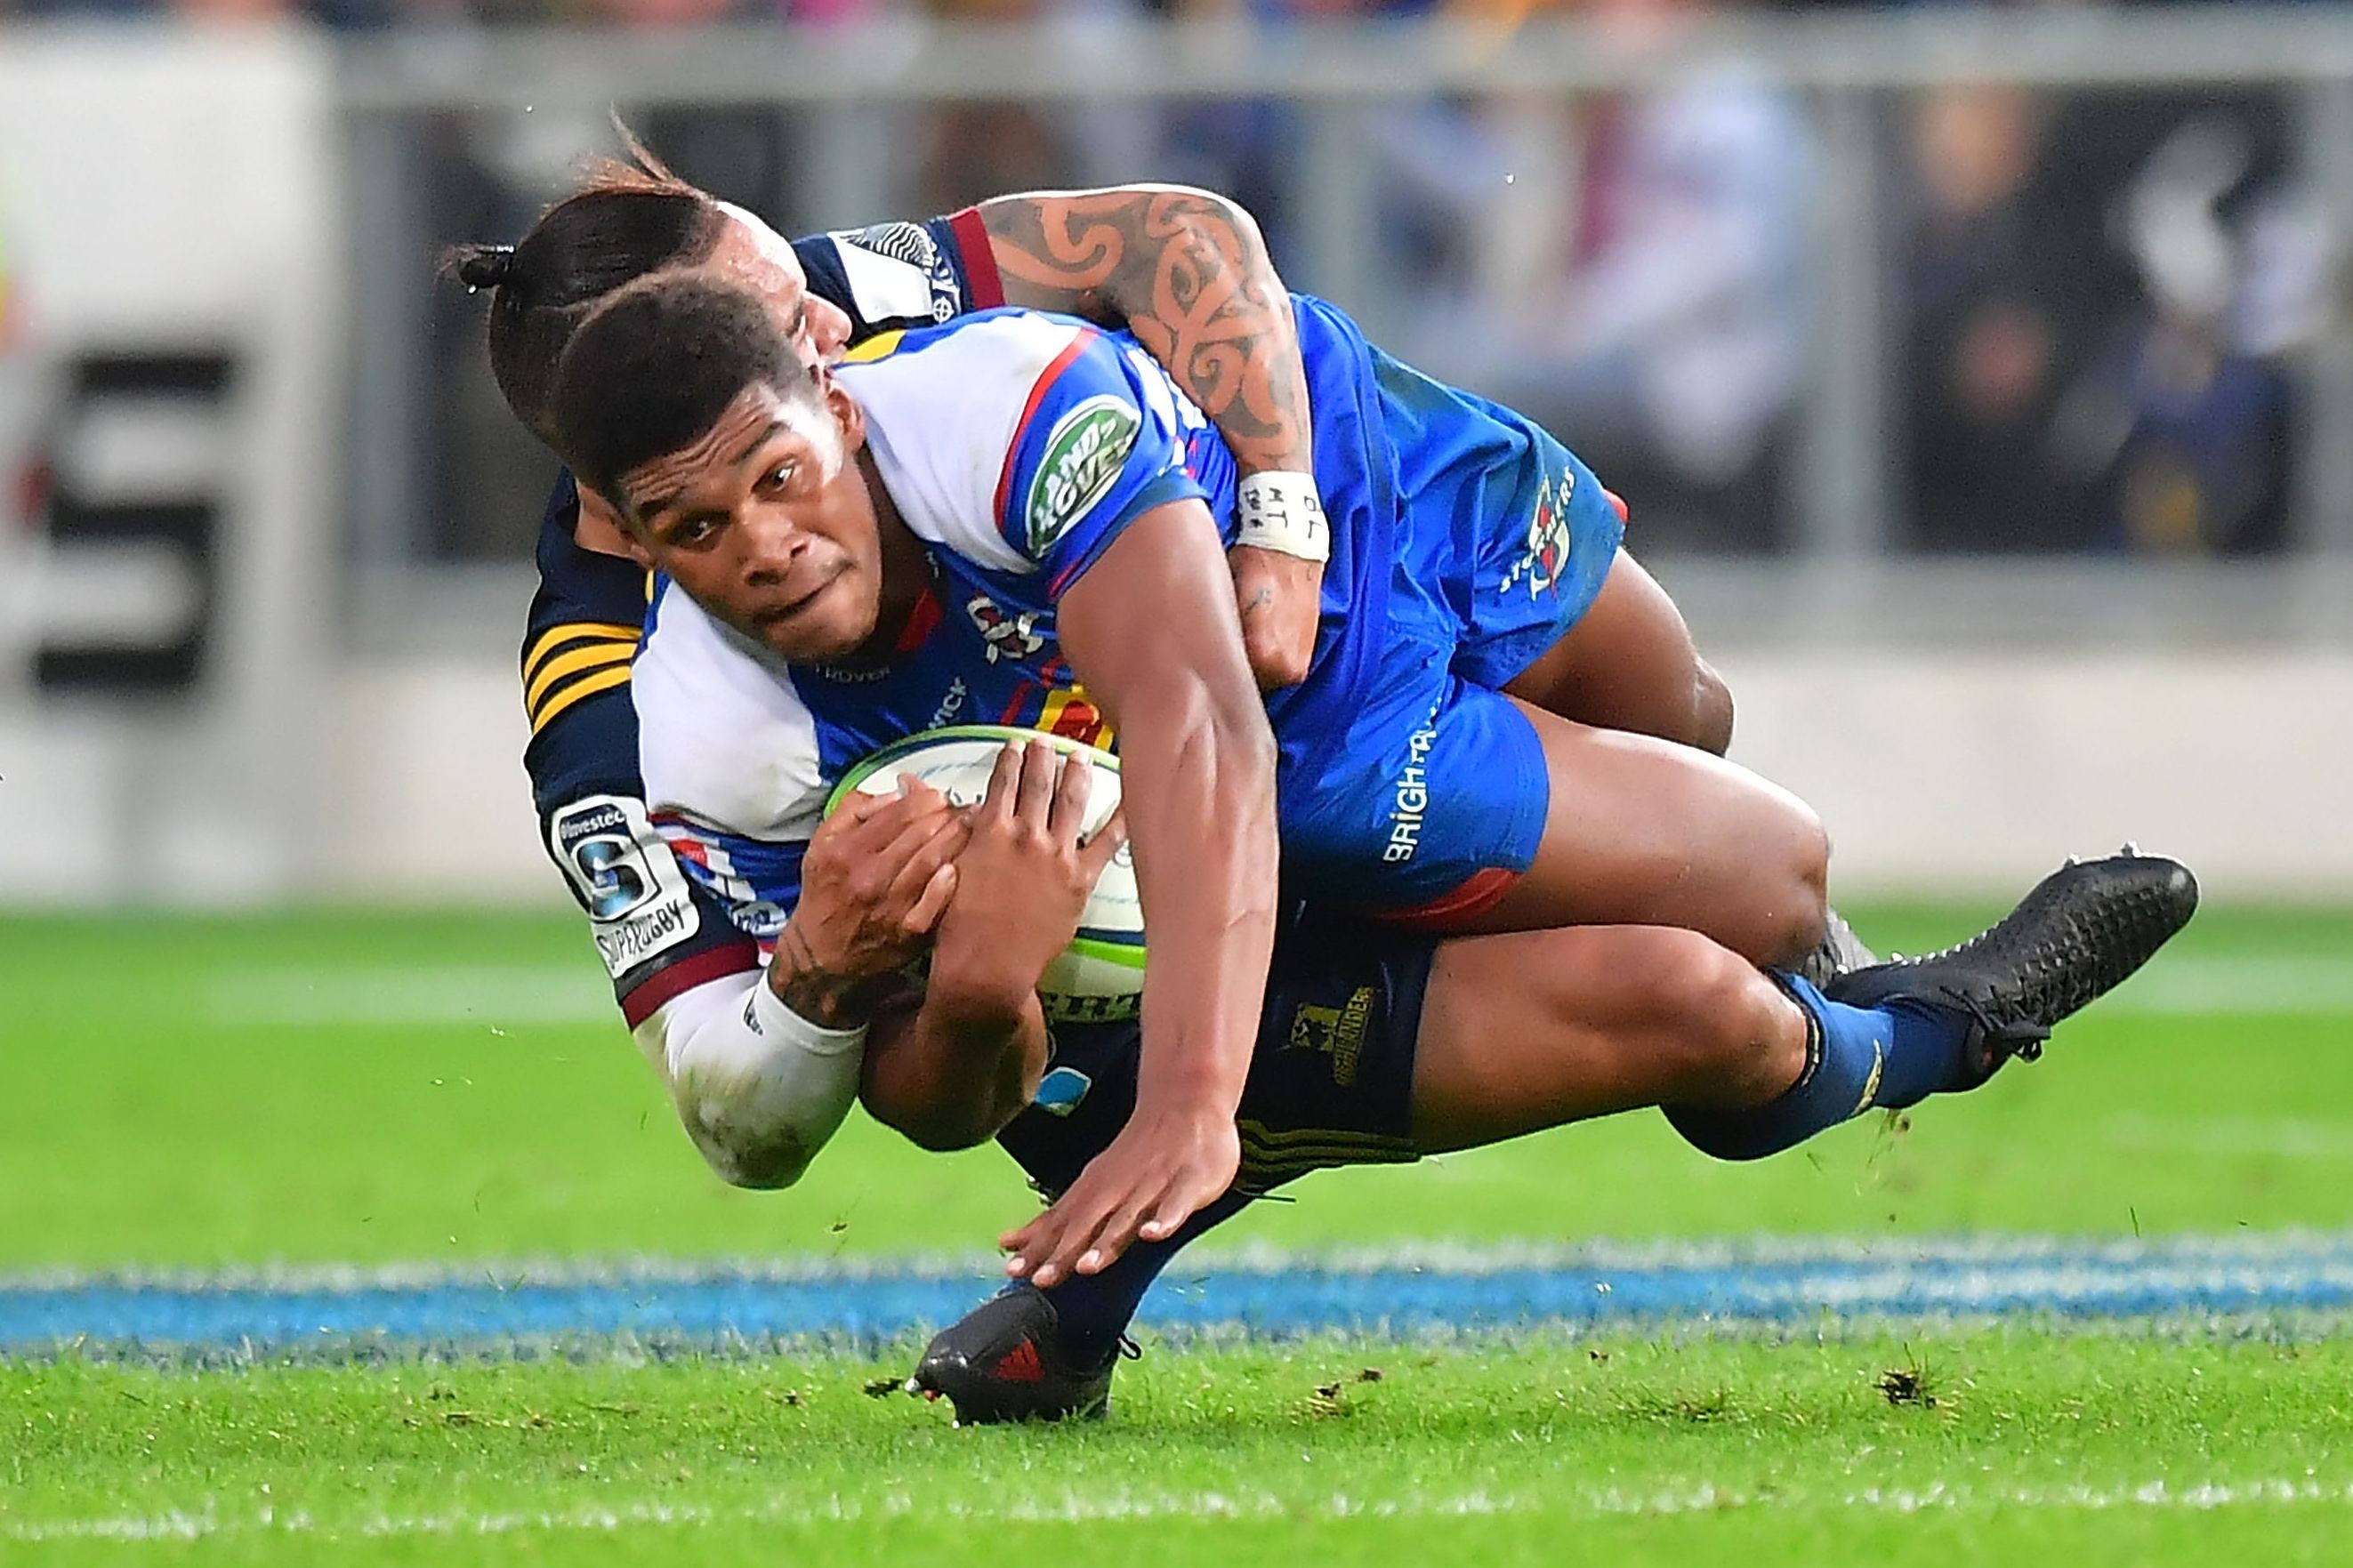 Stormers’ star Damian Willemse is tackled by Highlanders’ scrum half Aaron Smith. Photo: AFP